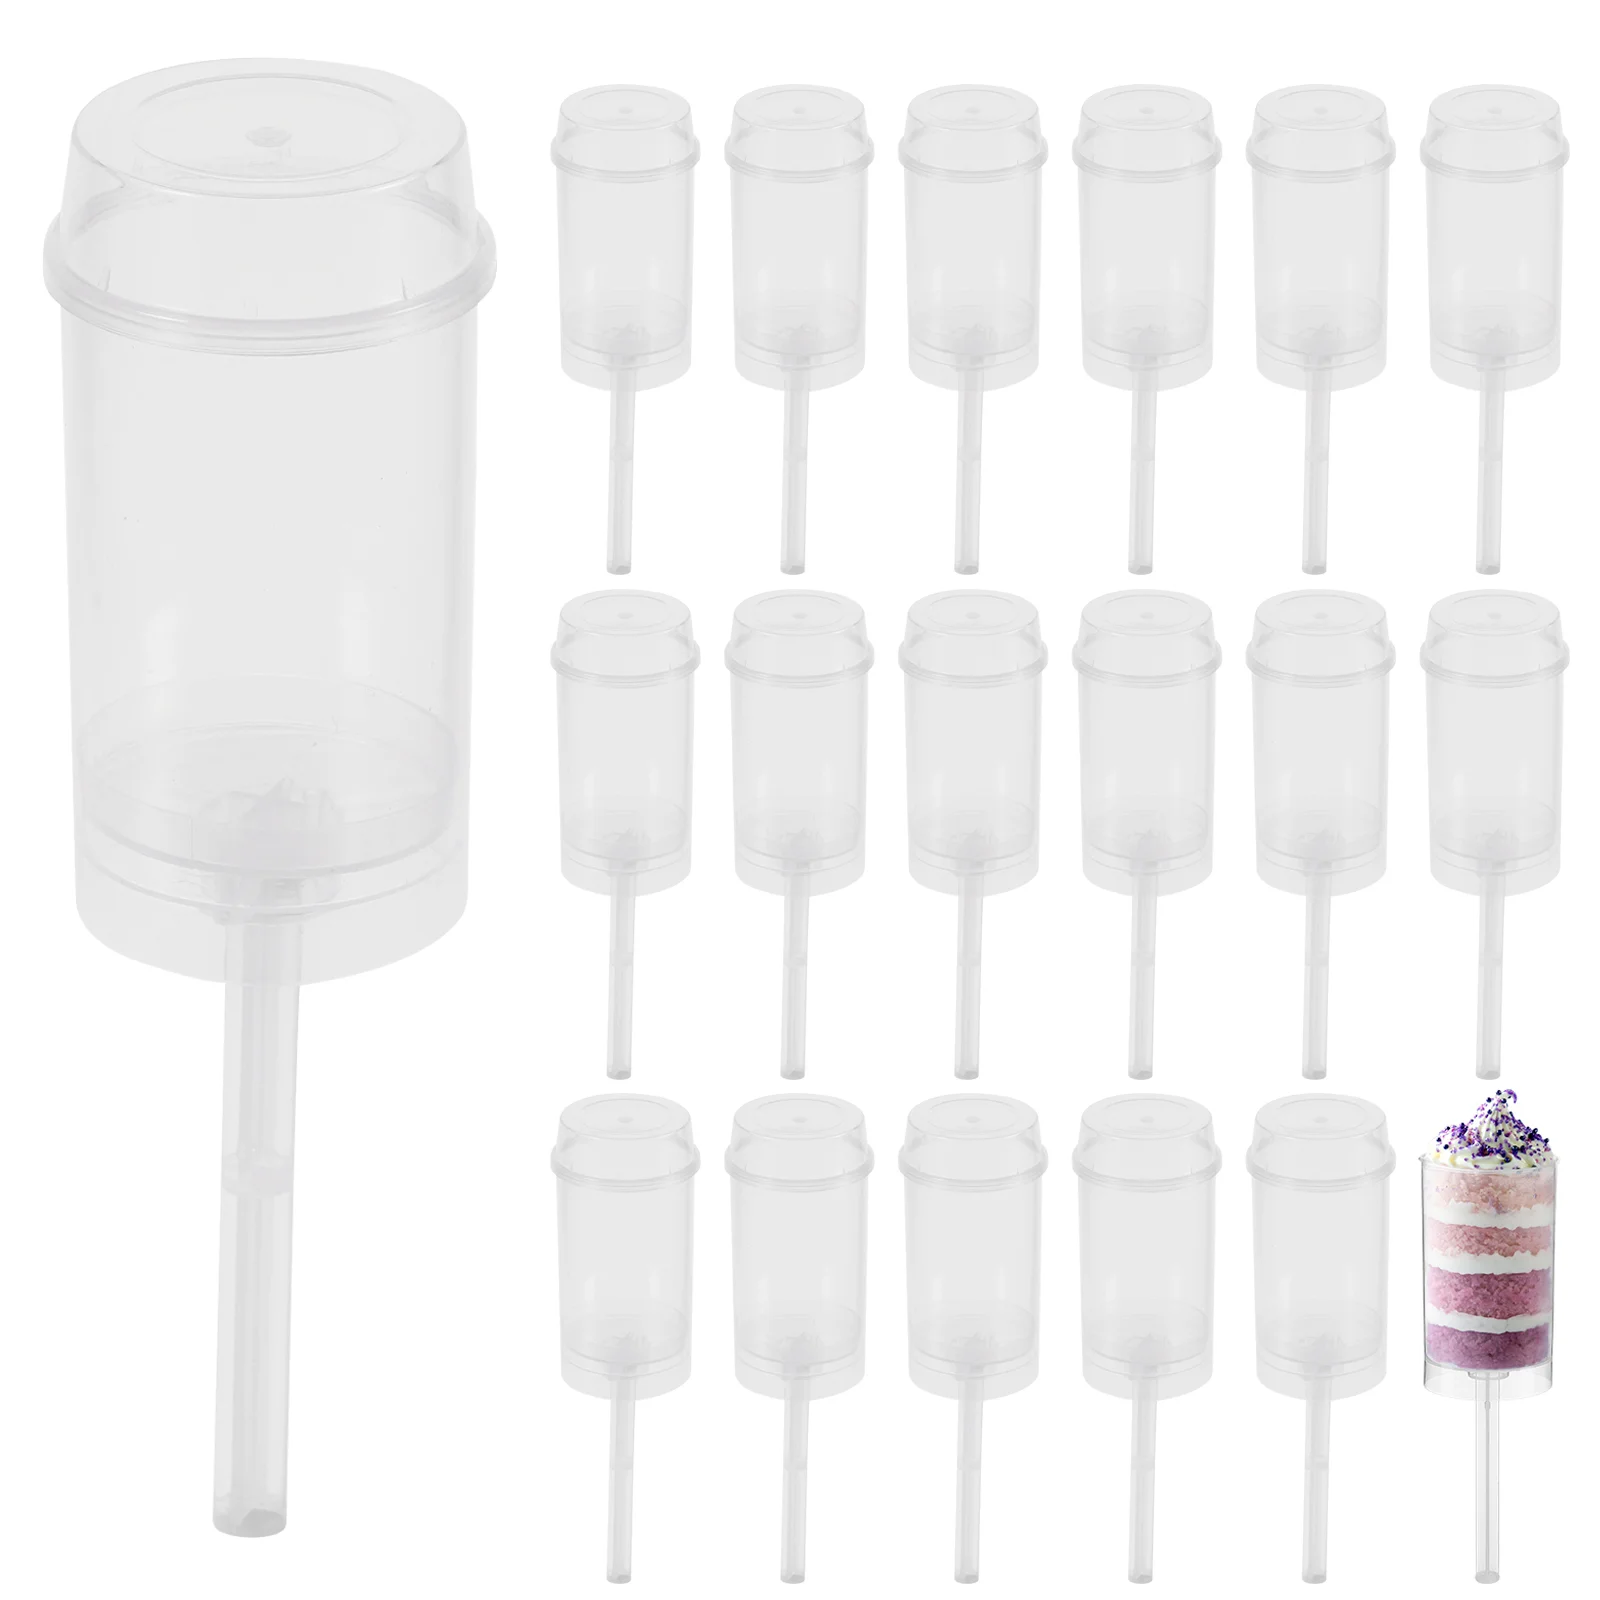 

Cake Push Containers Up Shooter Holder Ice Cream Dessert Mold Round Lids Clear Container Cylinder Maker Shooters Molds Popsicle